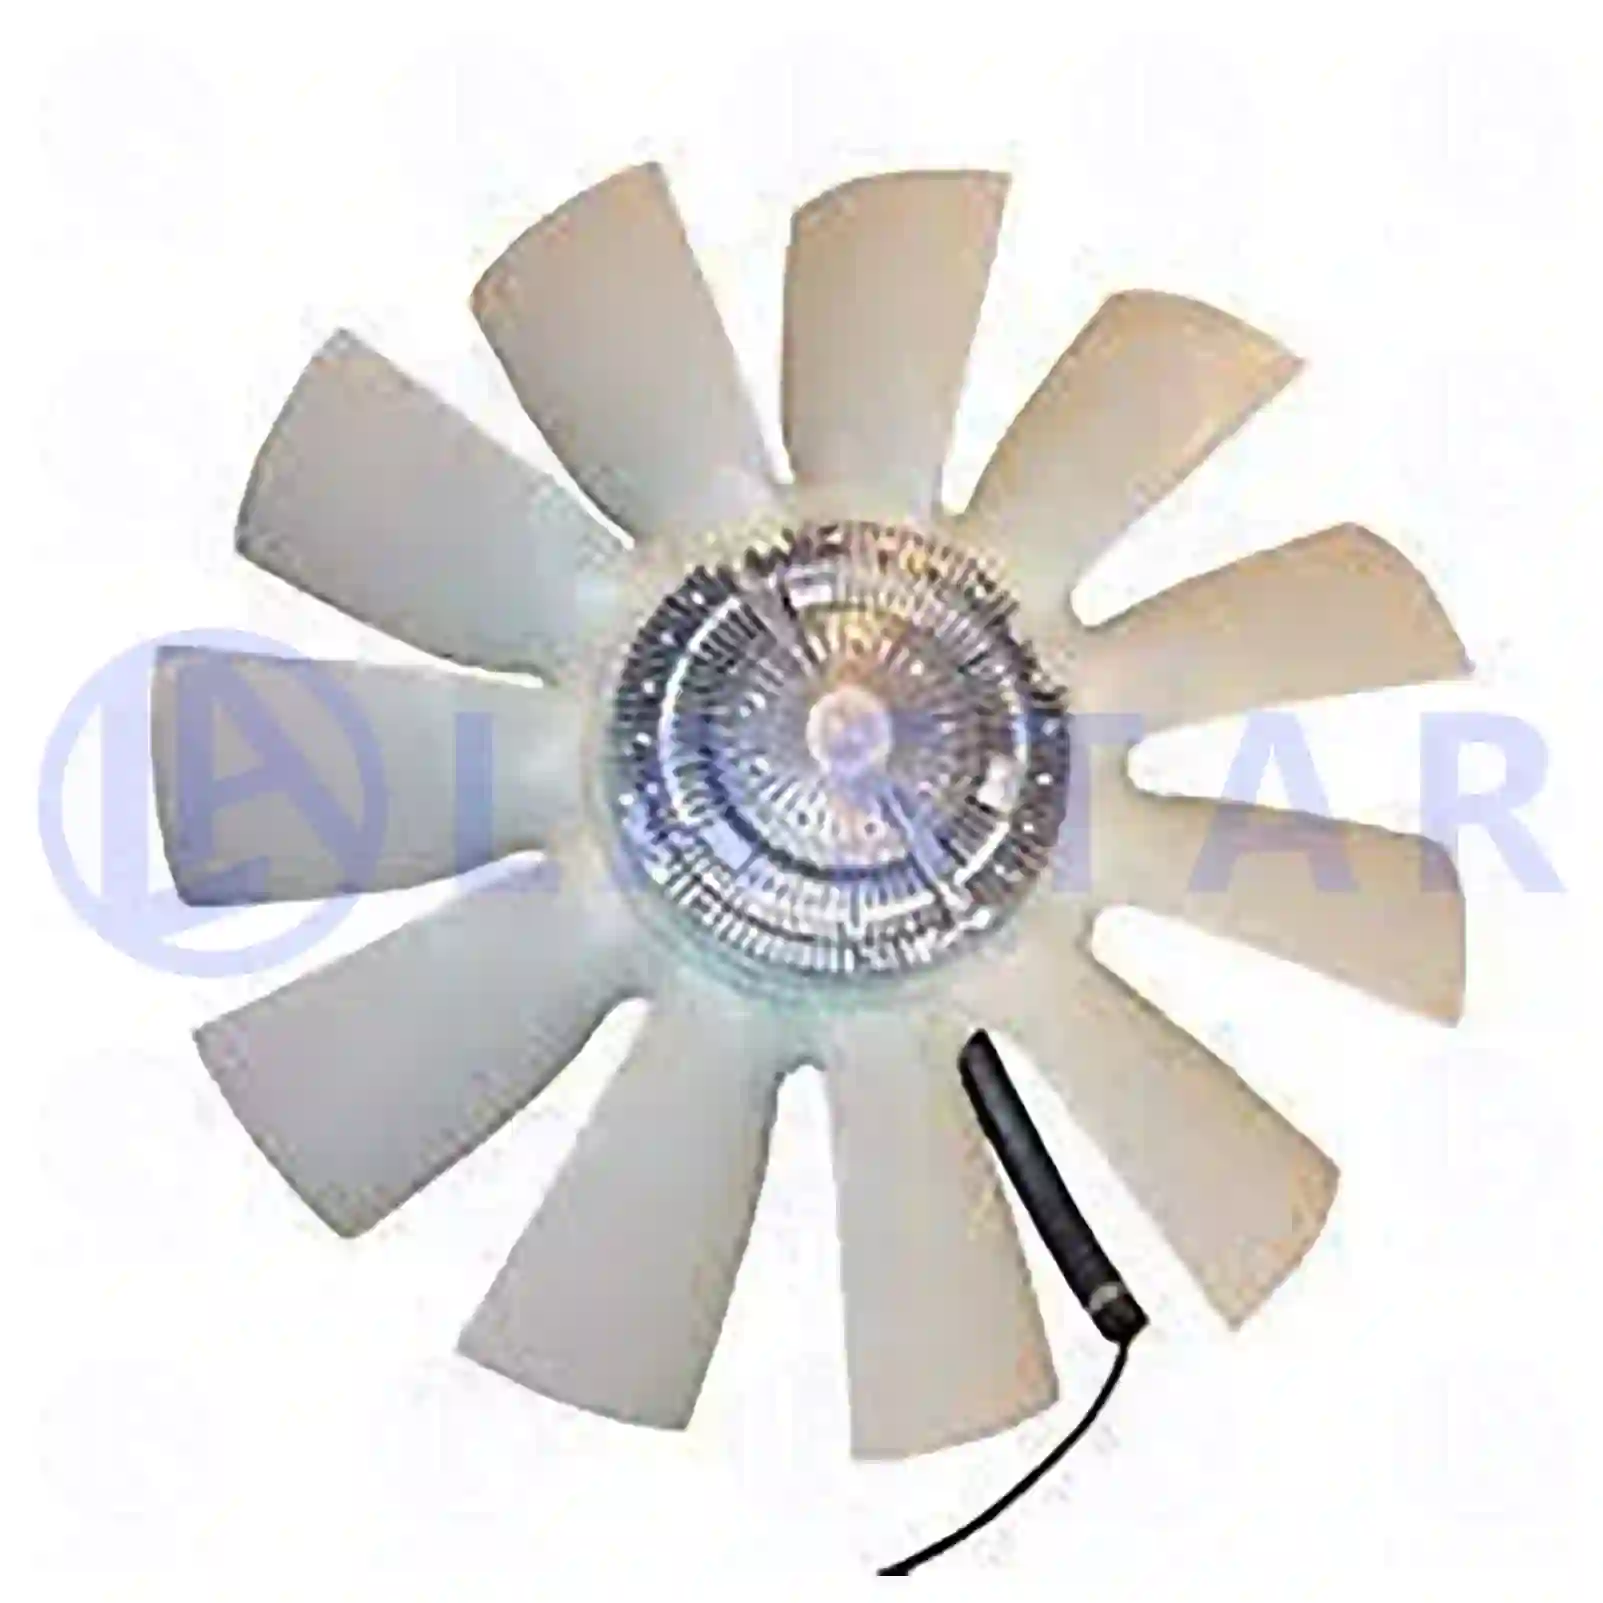 Fan with clutch, 77709824, 1853555, 2078557, 2410082 ||  77709824 Lastar Spare Part | Truck Spare Parts, Auotomotive Spare Parts Fan with clutch, 77709824, 1853555, 2078557, 2410082 ||  77709824 Lastar Spare Part | Truck Spare Parts, Auotomotive Spare Parts